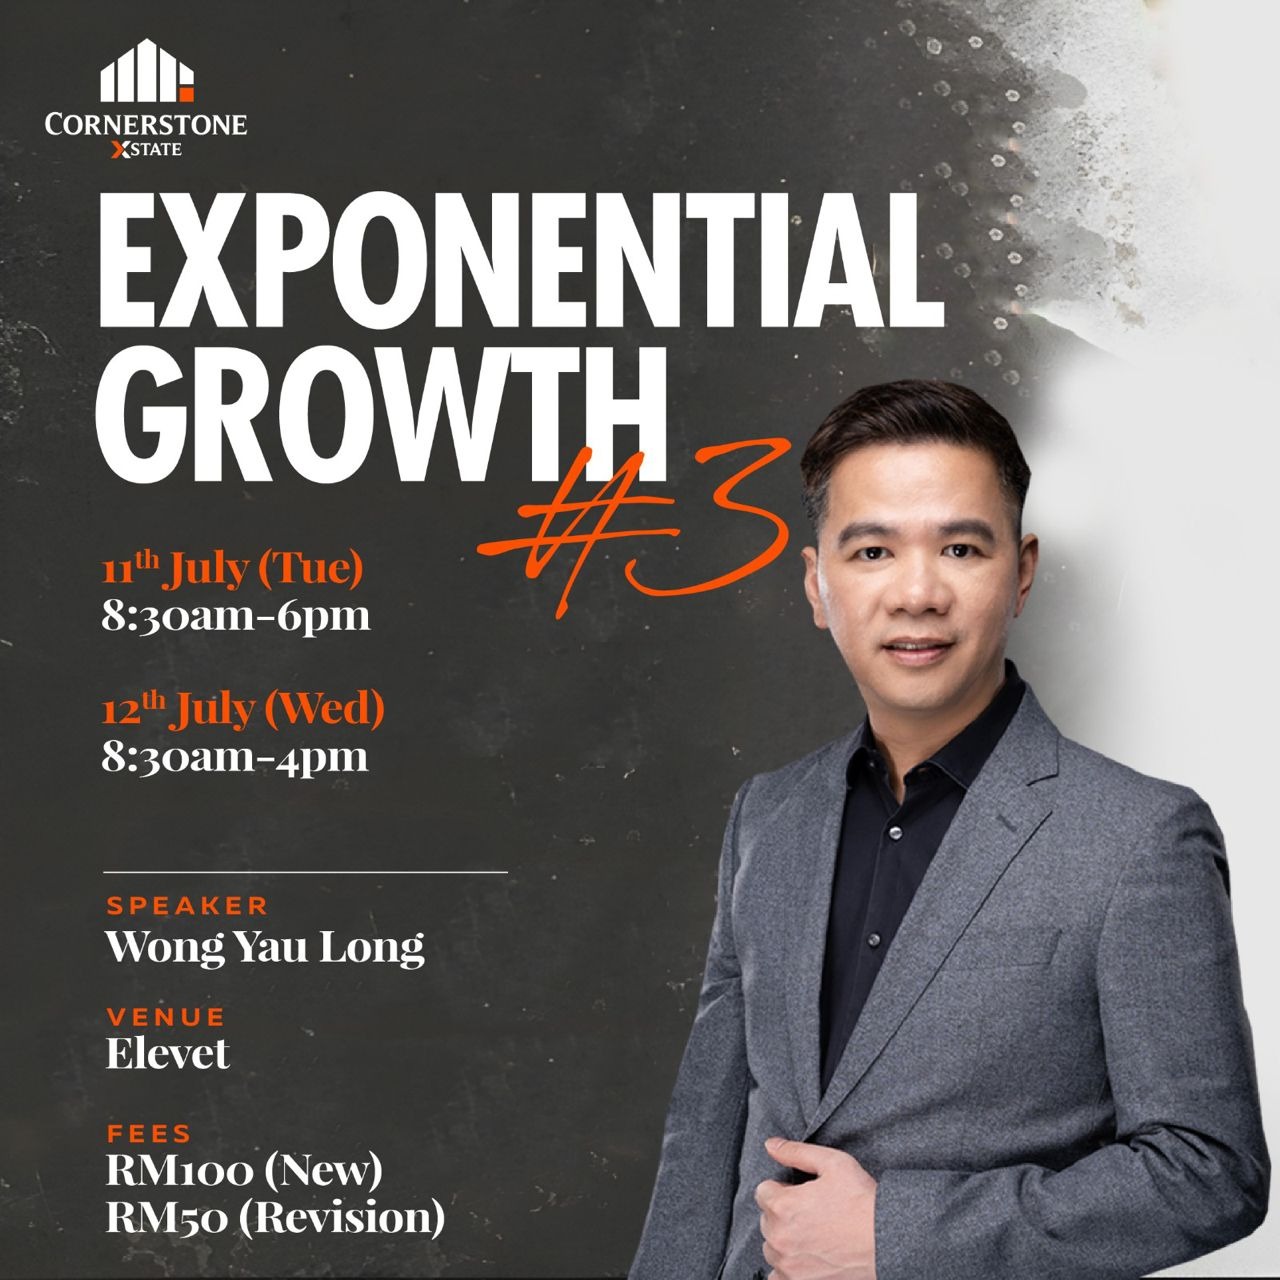 Exponential Growth #3 Your Real Estate Biz by Mr Wong Yau Long